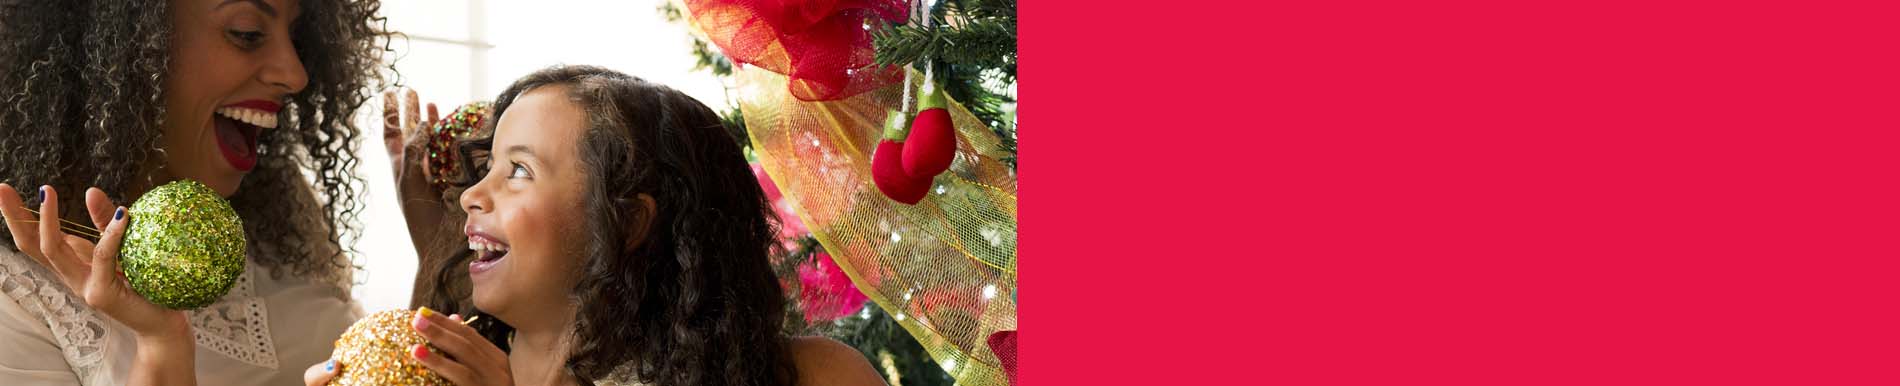 https://www.healthychildren.org/SiteCollectionImage-Homepage-Banners/Holiday_Ornaments_Mom_Daughter_Banner.jpg